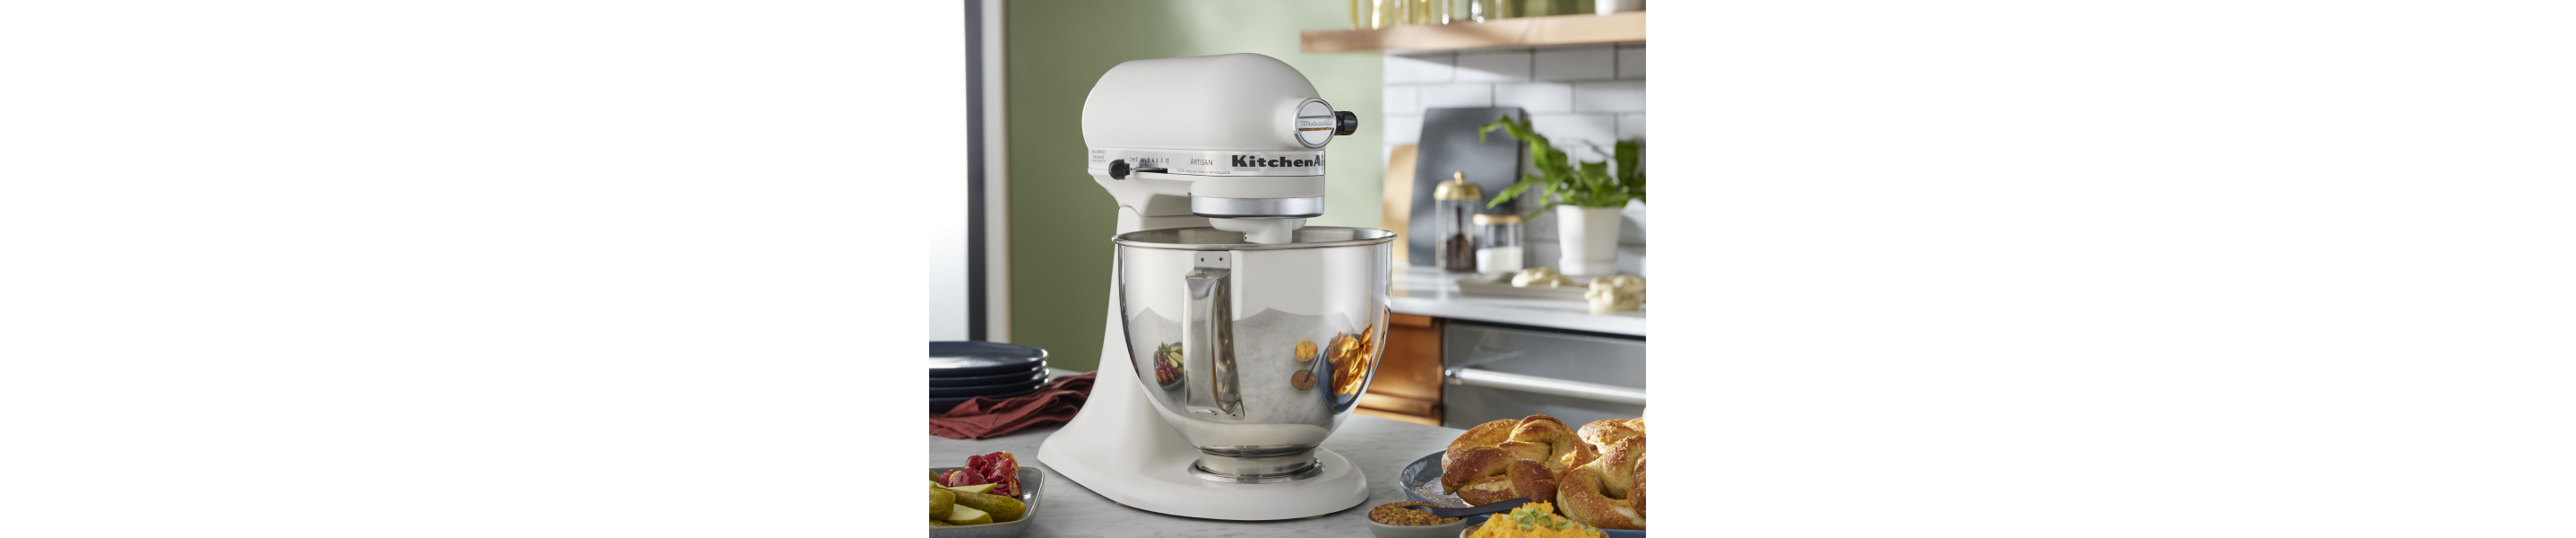 Zoologisk have Byblomst Resignation Classic™ vs. Artisan®: Stand Mixer Differences | KitchenAid